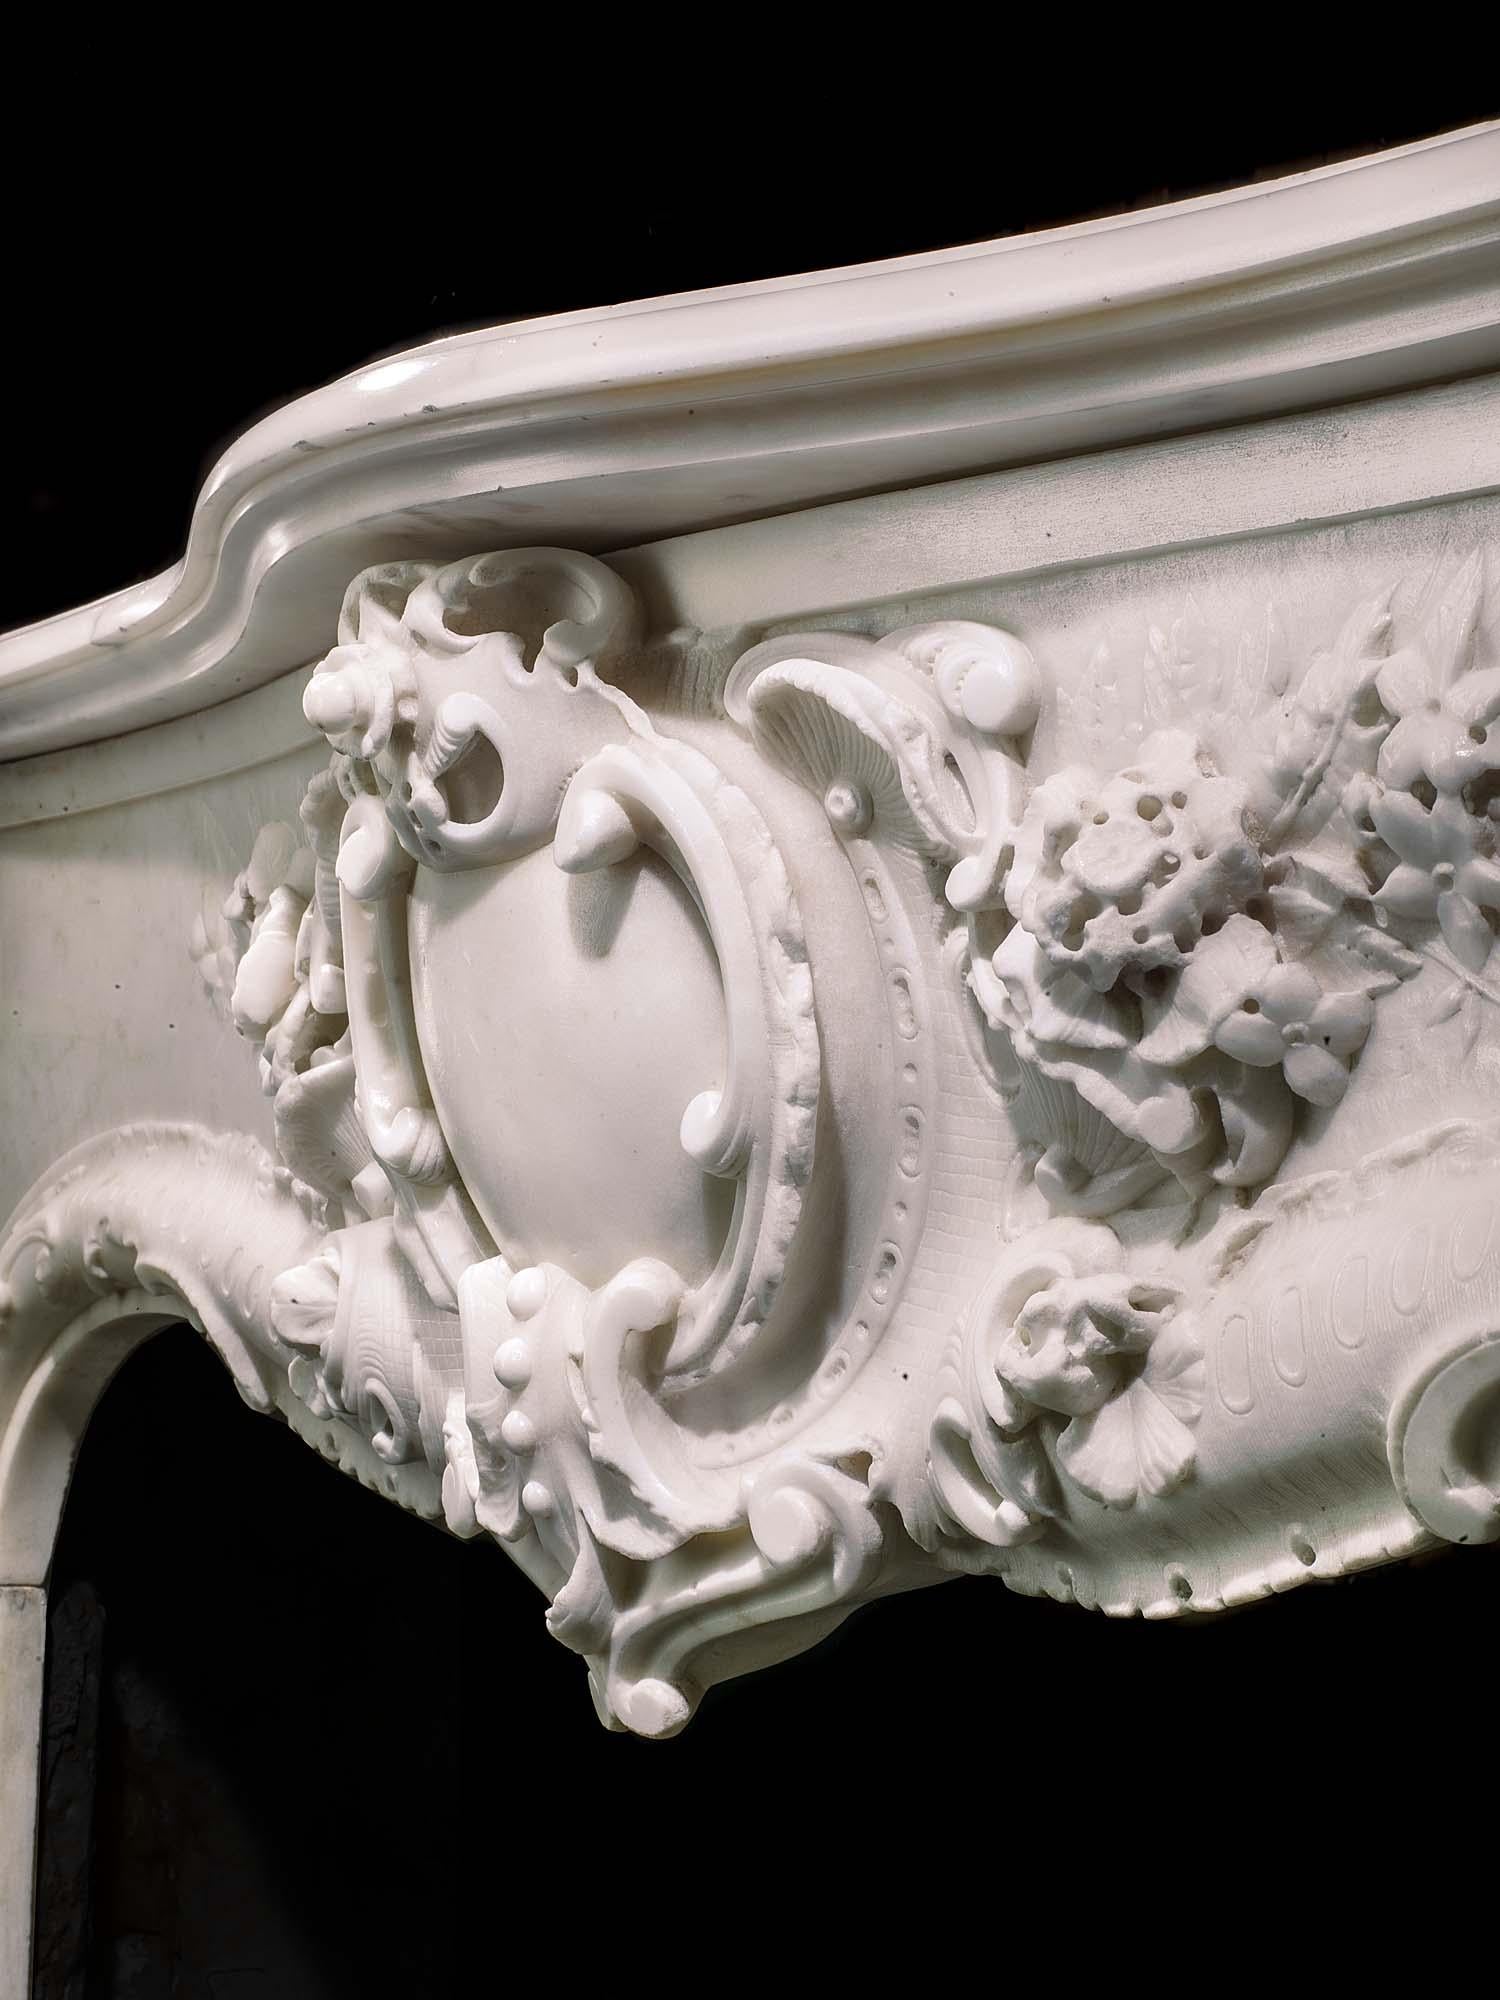 Statuary Marble Very Rare and Important Mid-18th Century English Rococo Marble Fireplace Mantel